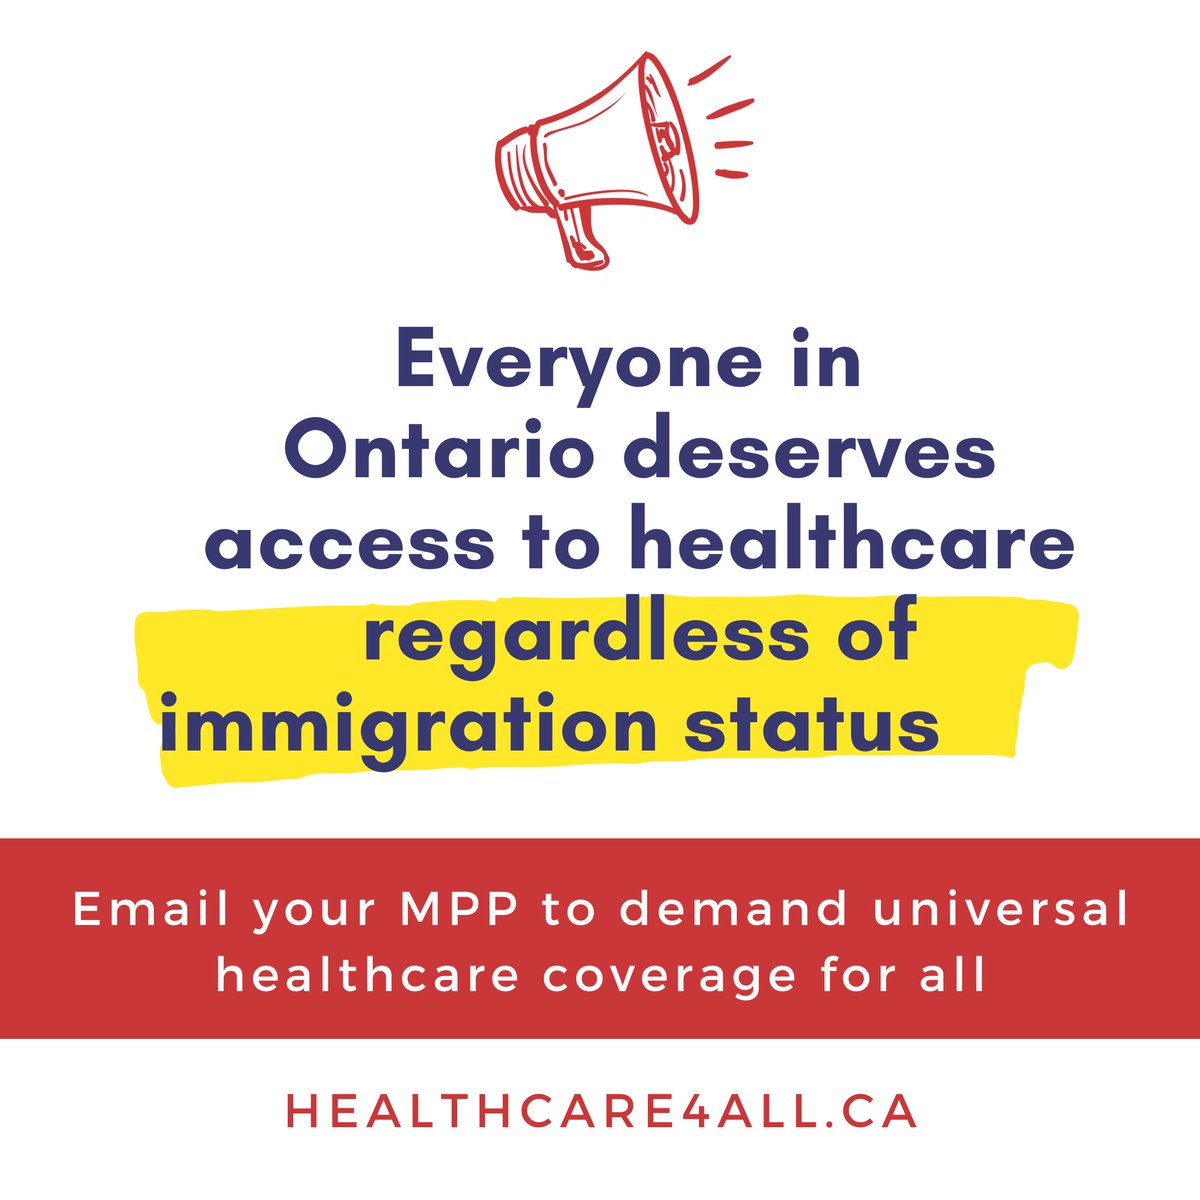 ATTENTION: At the beginning of this year, @fordnation cut access to #healthcare for the uninsured. Send an e-mail to Premier Ford & Health Minister @SylviaJonesMPP demanding free, universal, and accessible #Healthcare4All: healthcare4all.ca #StatusForAll #Justice4Workers